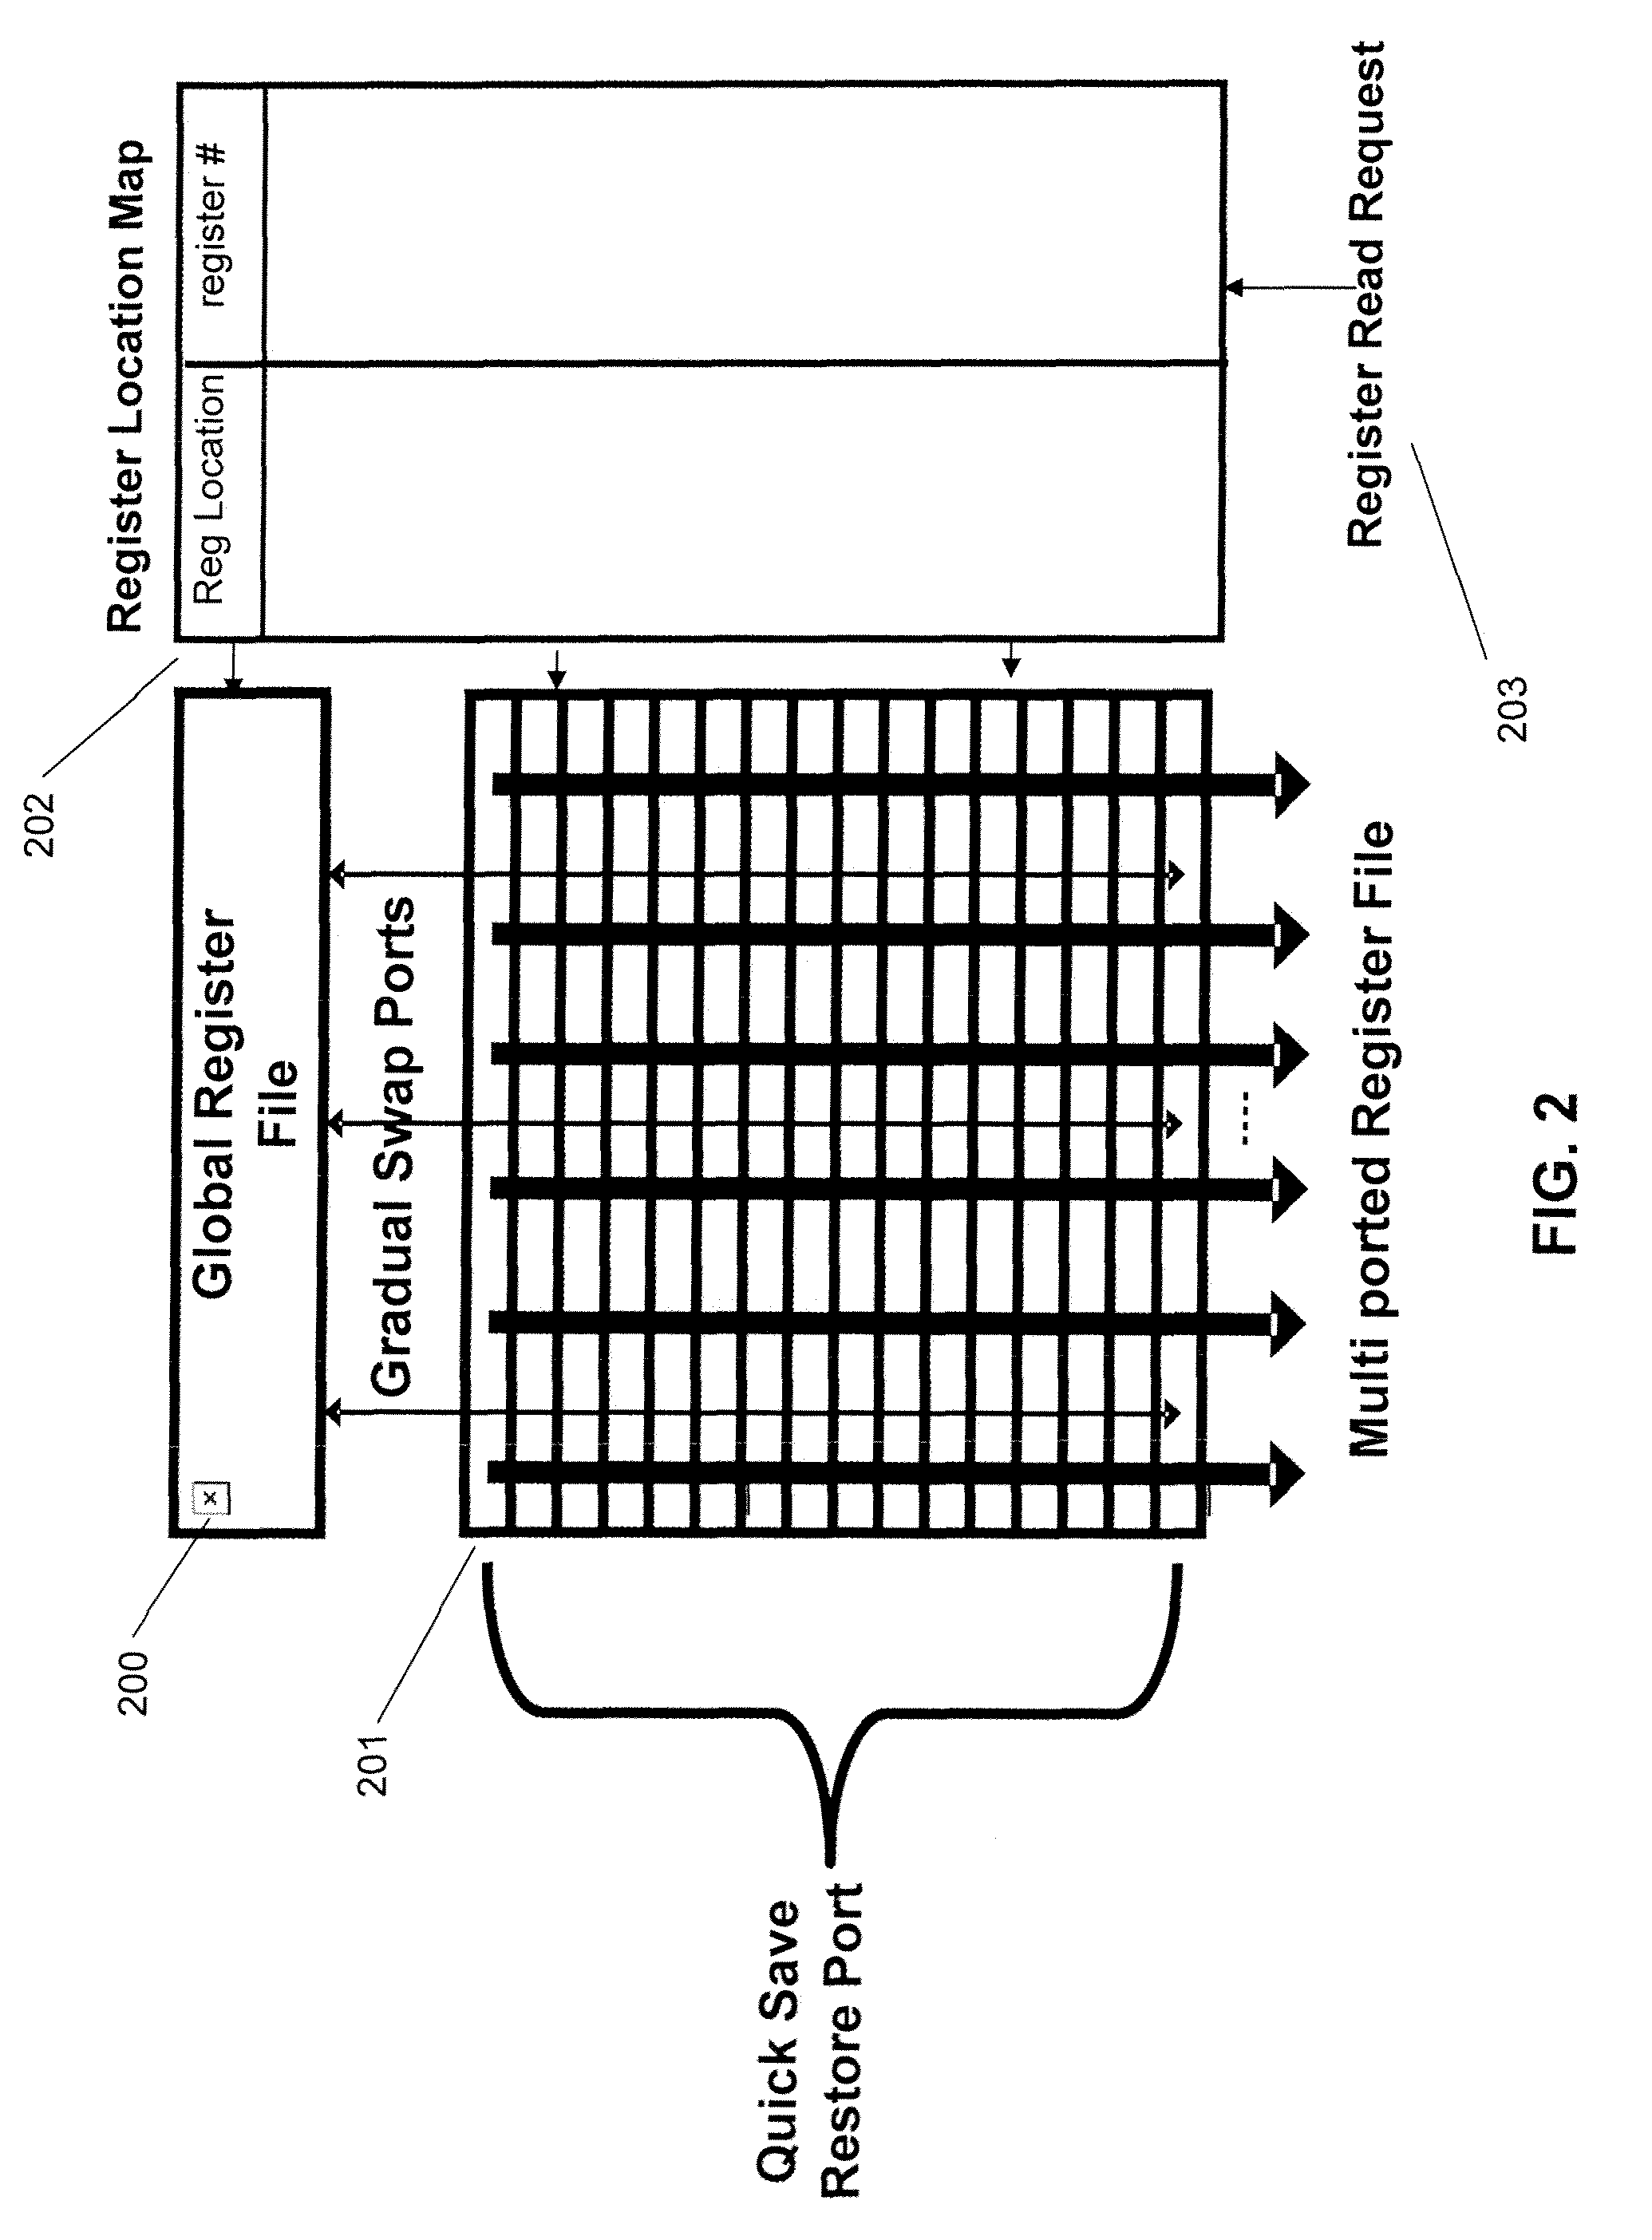 Parallel processing of a sequential program using hardware generated threads and their instruction groups executing on plural execution units and accessing register file segments using dependency inheritance vectors across multiple engines